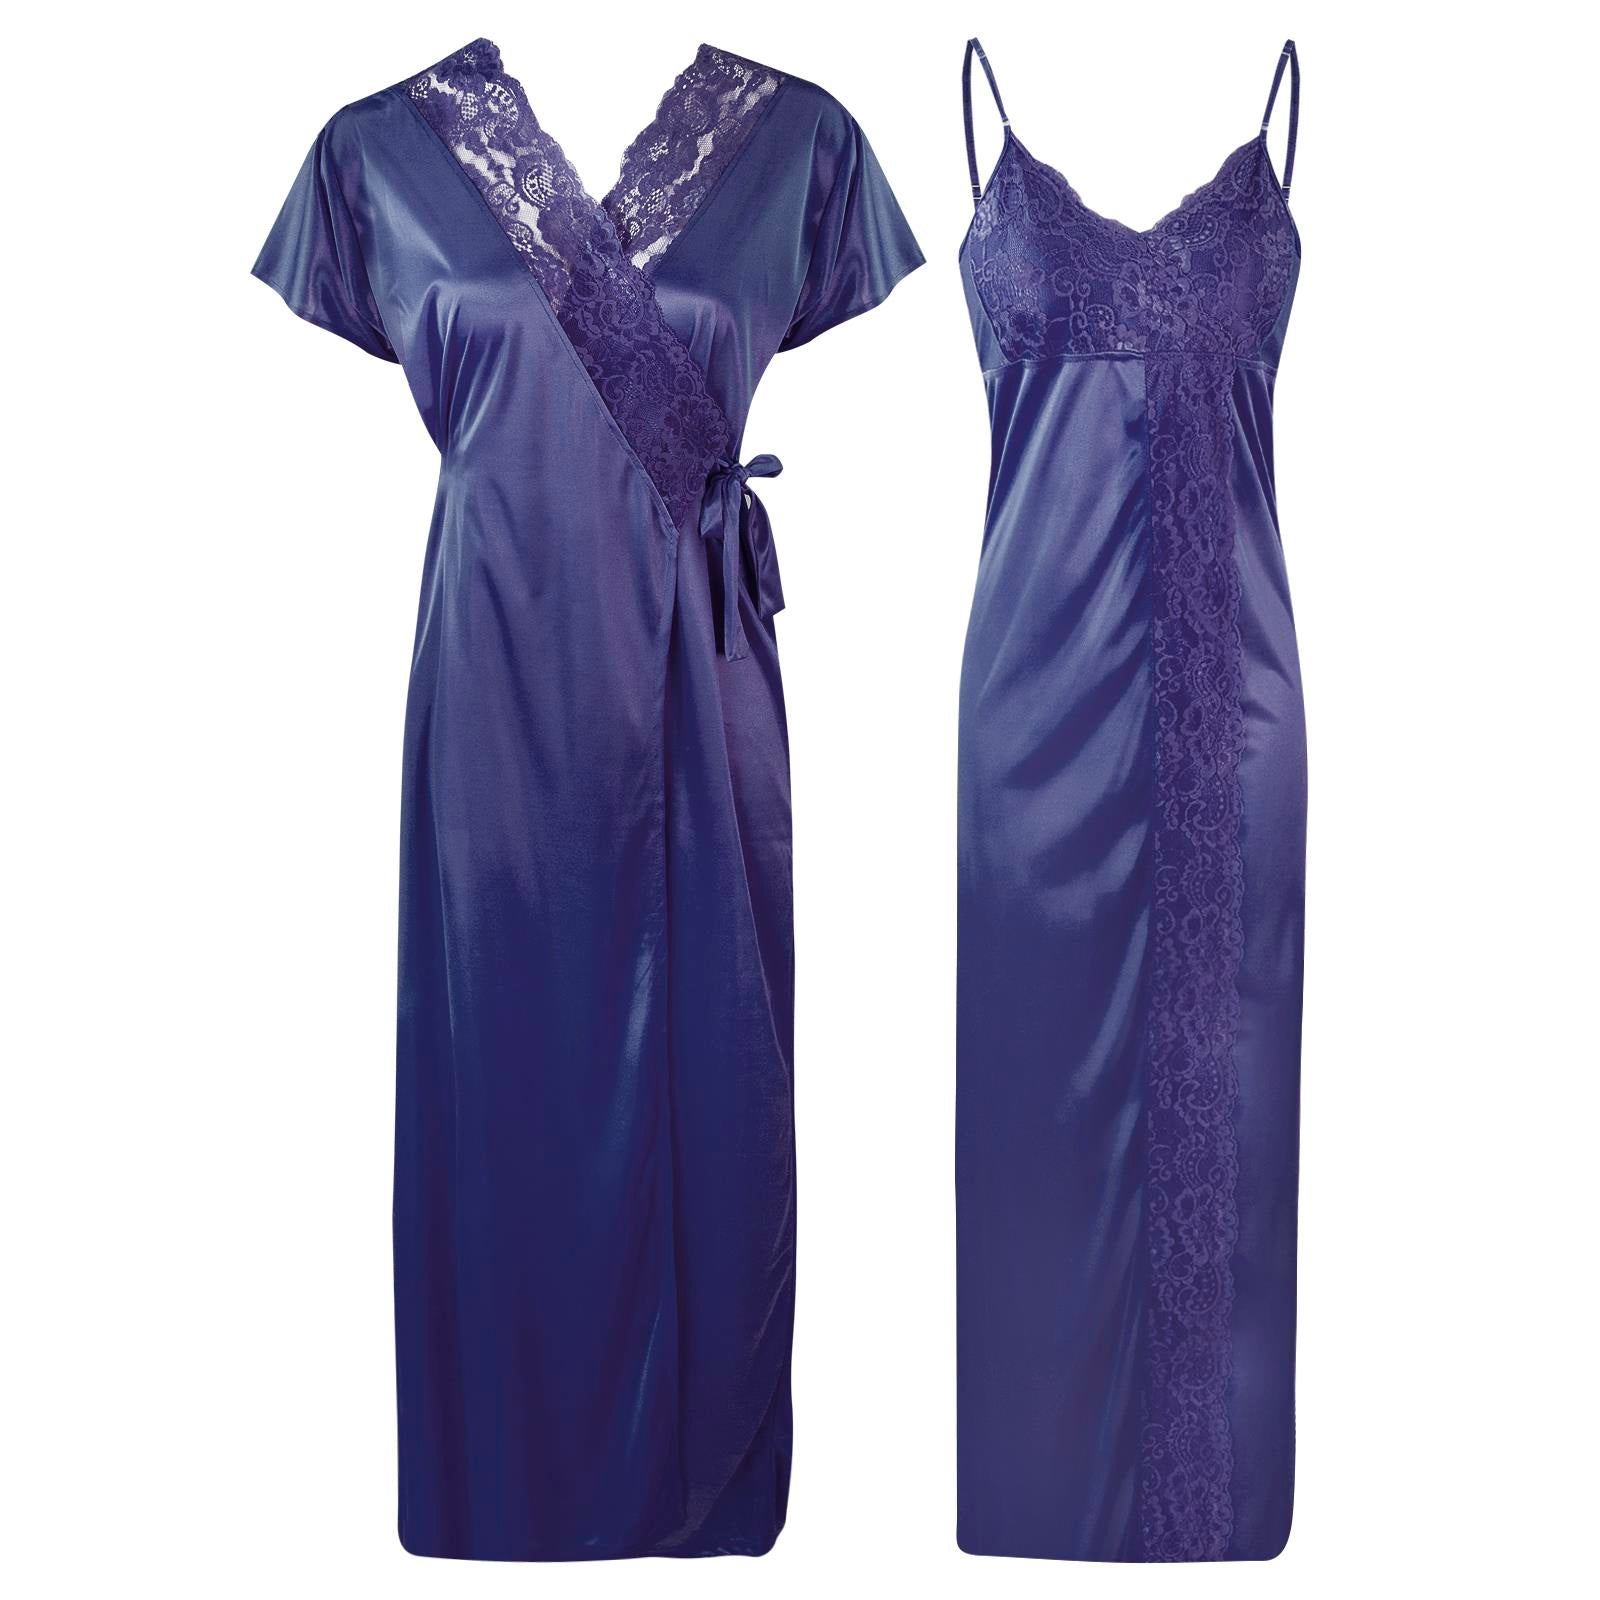 Navy / One Size WOMEN SATIN LACE LONG NIGHTDRESS NIGHTY CHEMISE CLEARANCE The Orange Tags